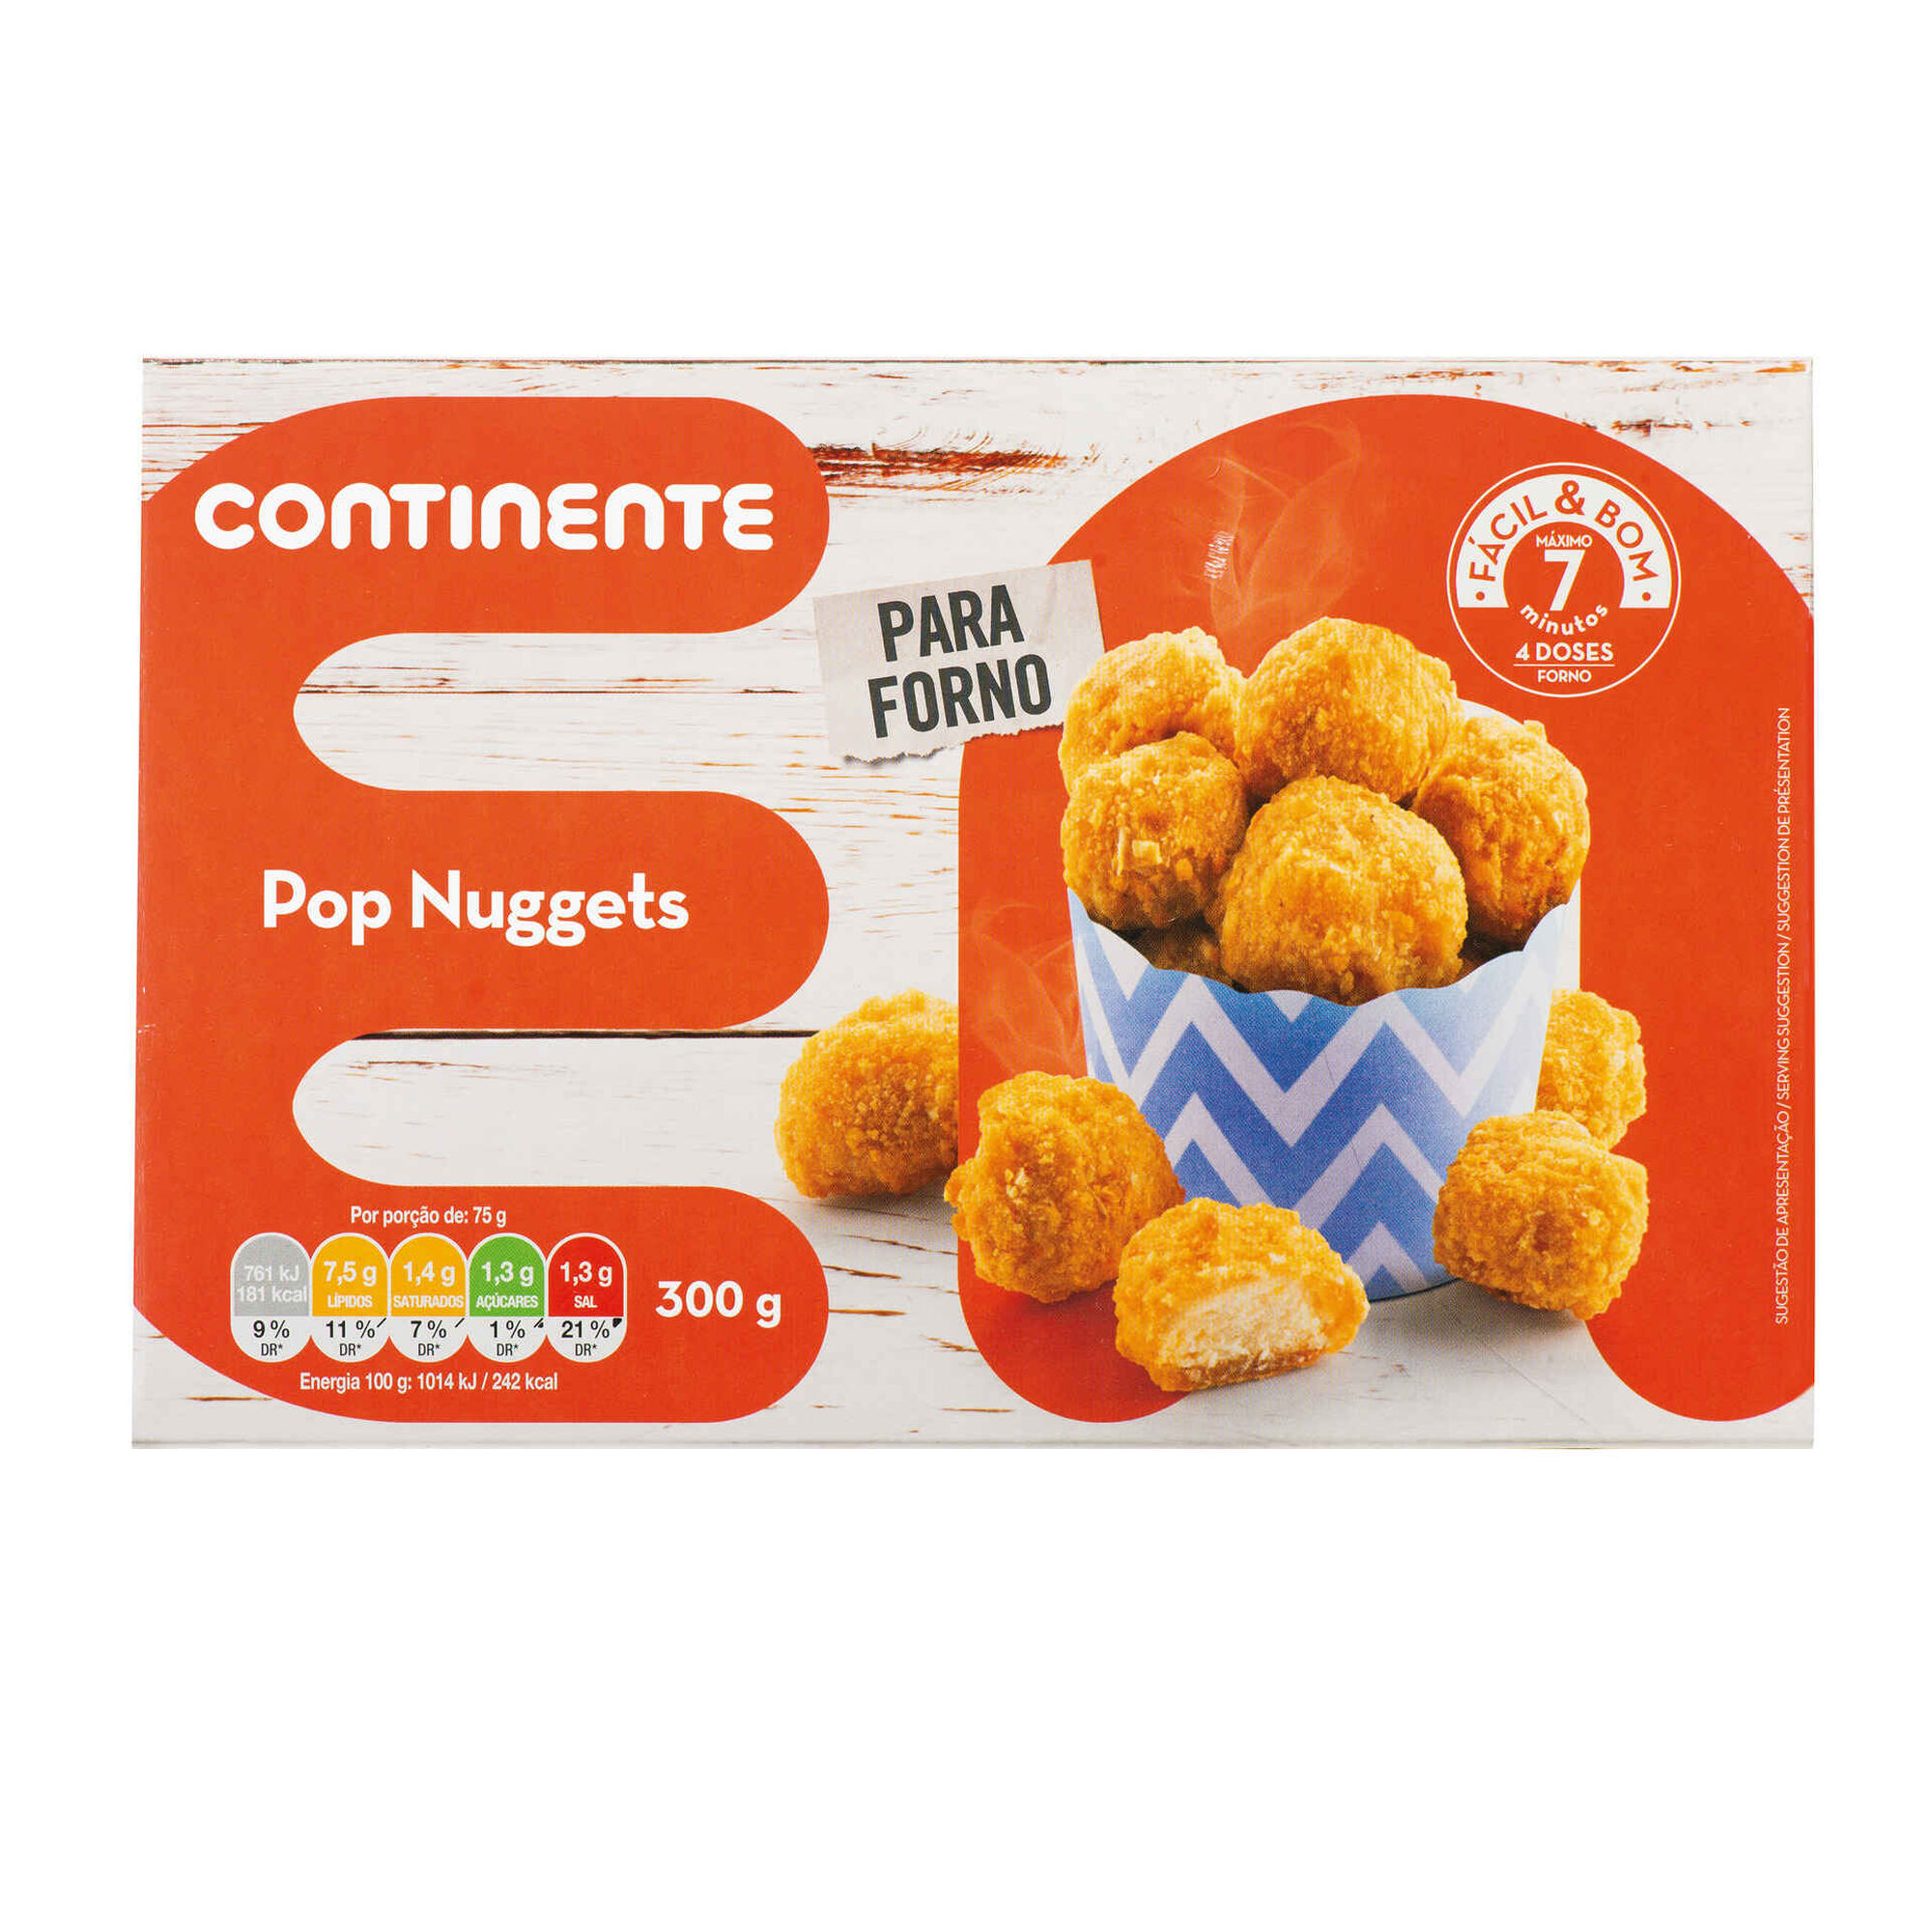 Pop Nuggets